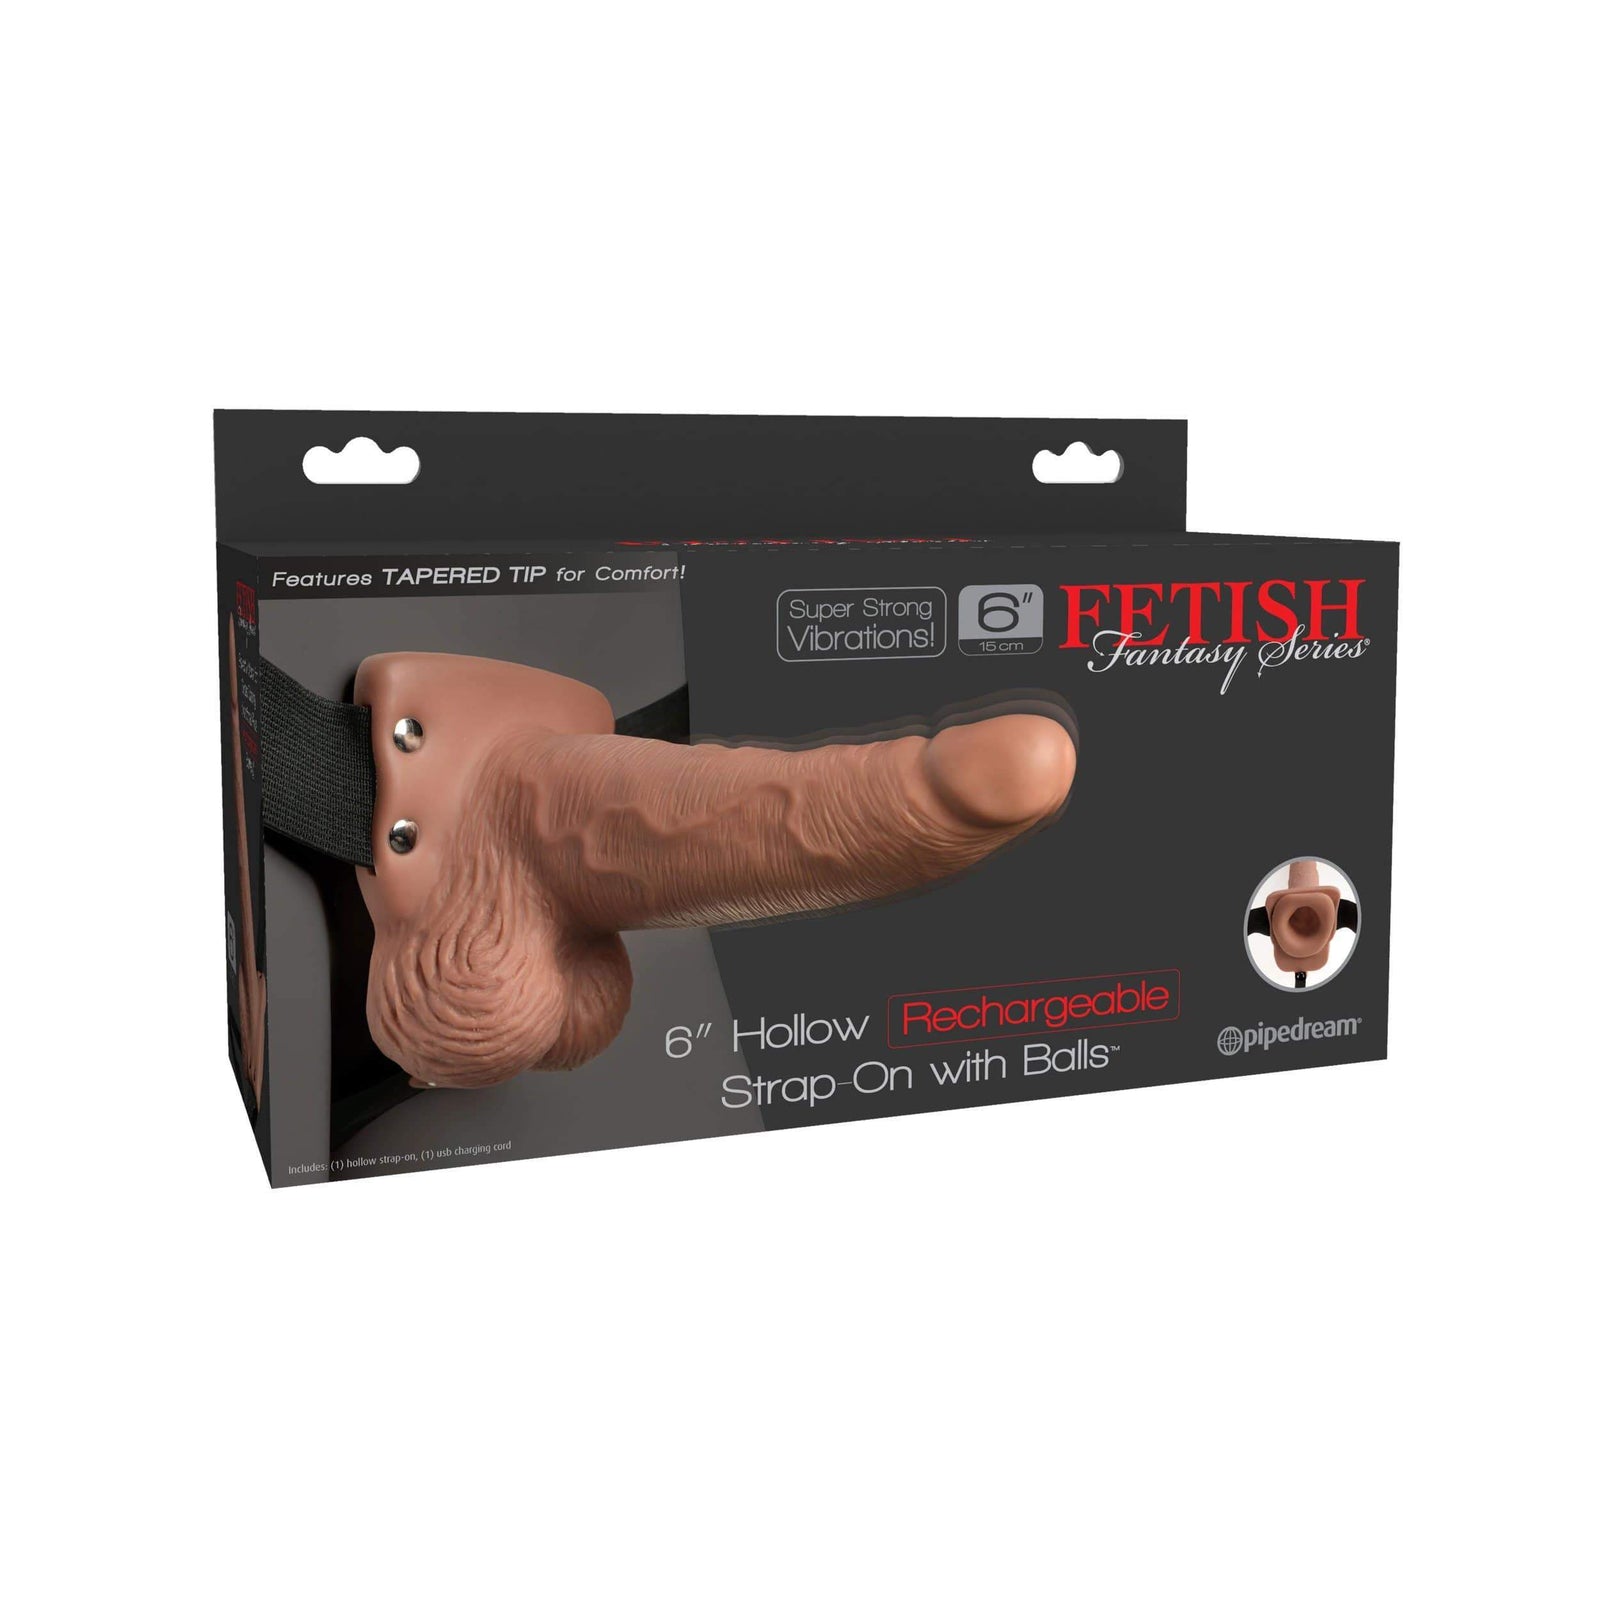 Pipedream - Fetish Fantasy Hollow Rechargeable Strap On 6" (Brown) Strap On with Hollow Dildo for Male (Vibration) Non Rechargeable 603912759211 CherryAffairs